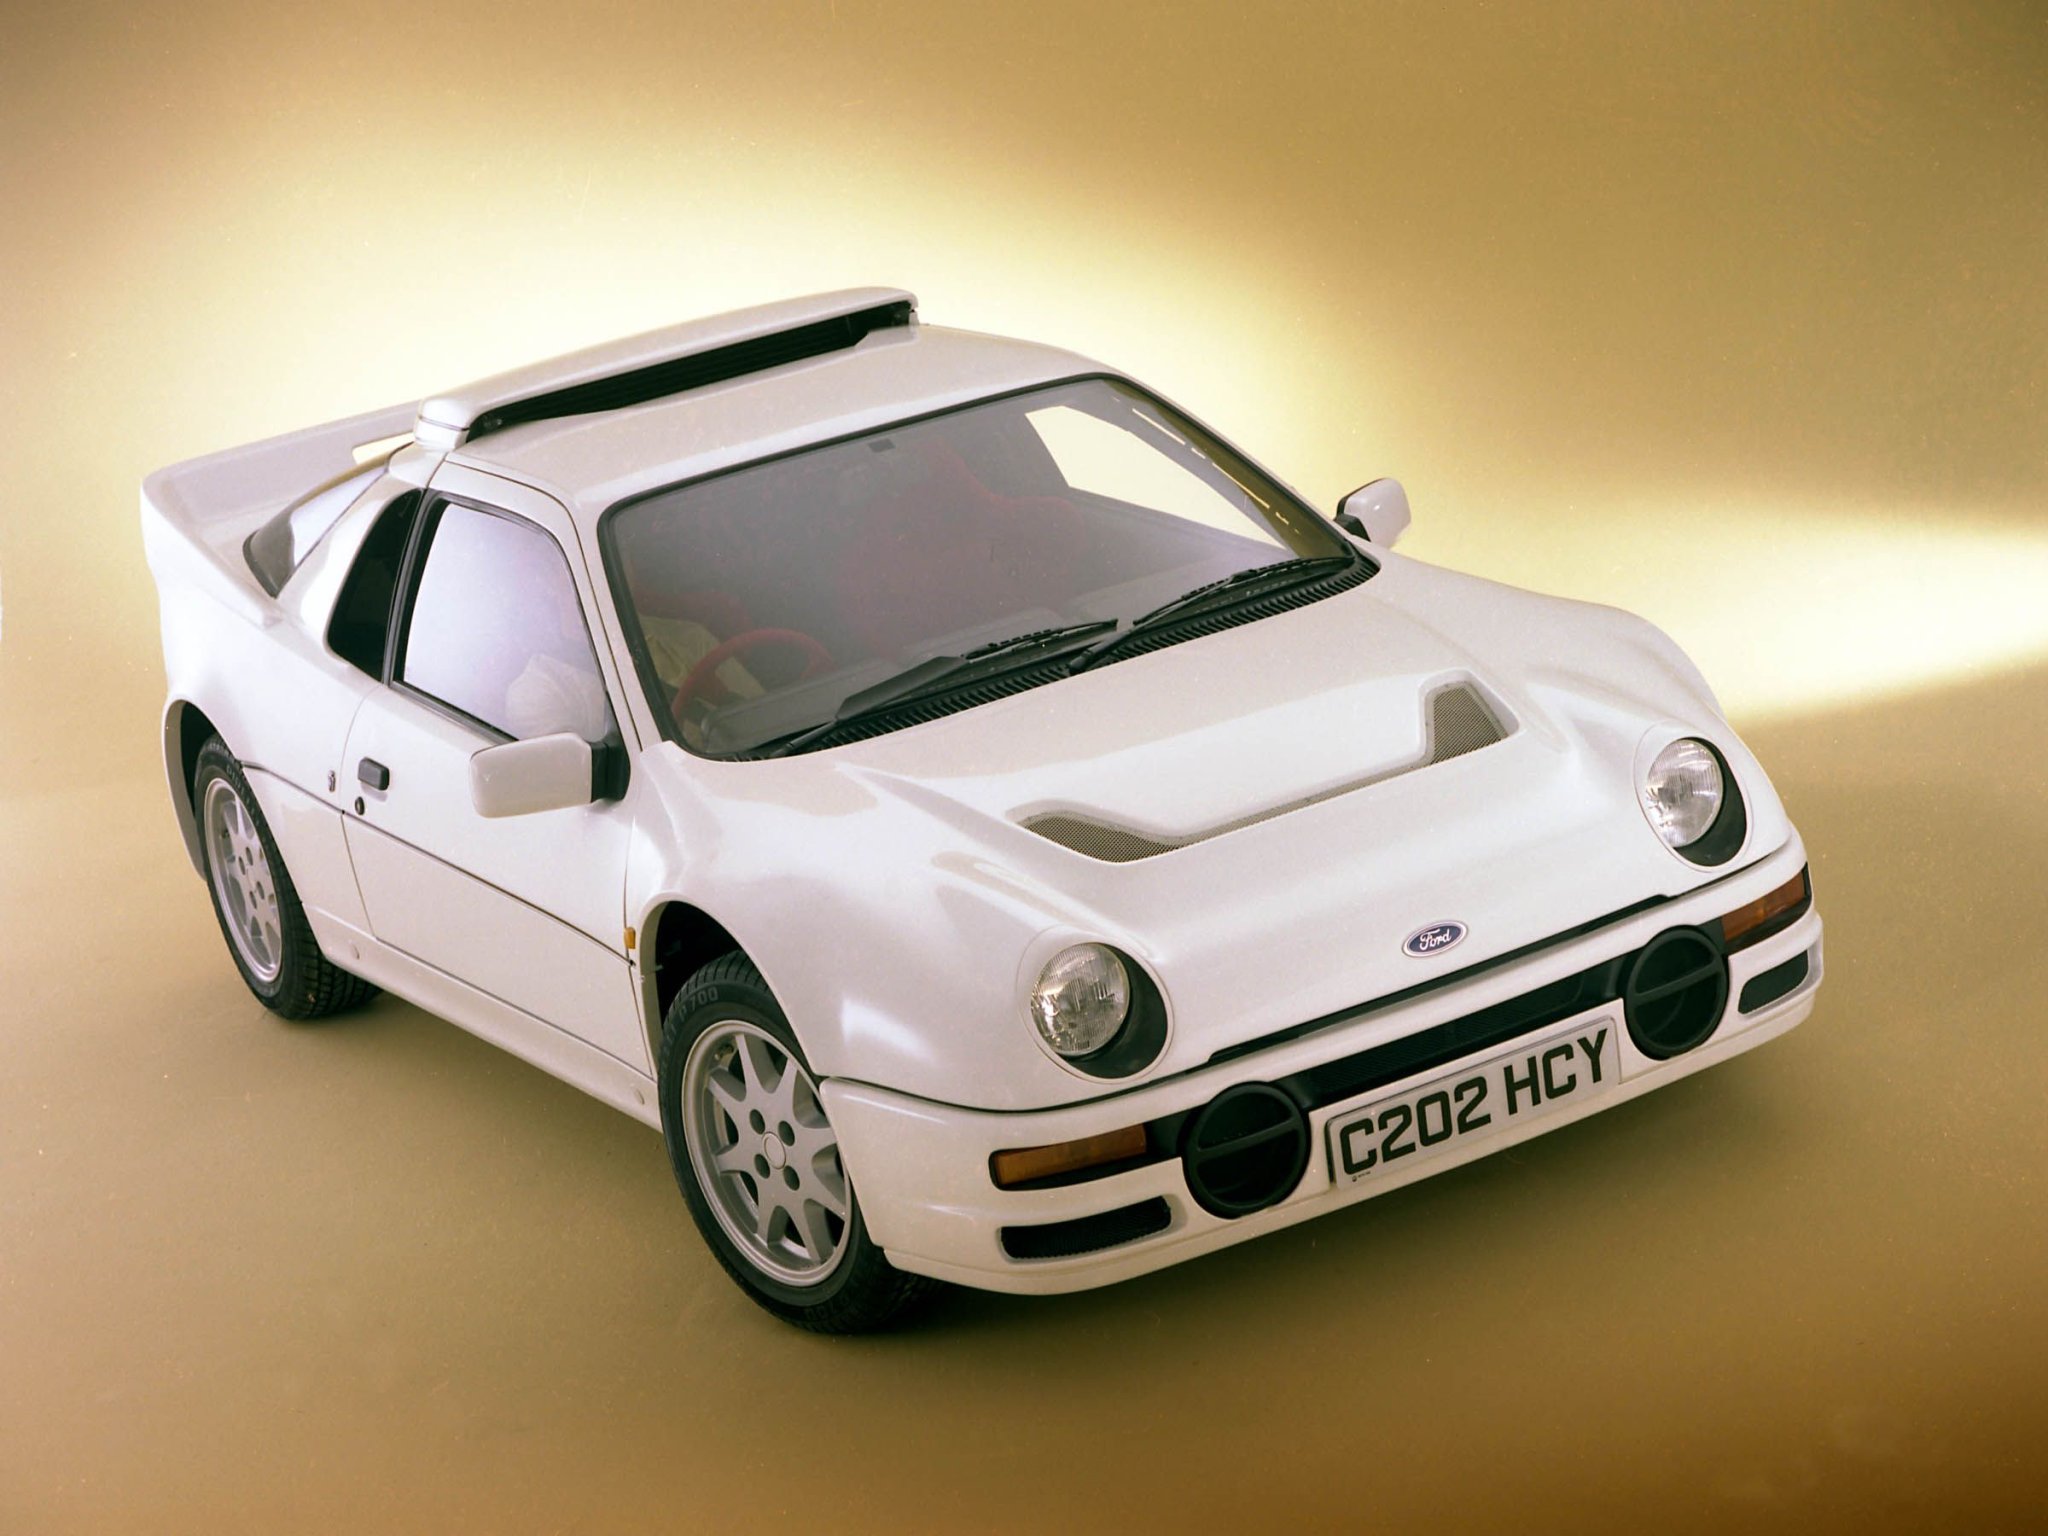 The Ford RS200 Had One of the Strangest Drivetrain Layouts Ever